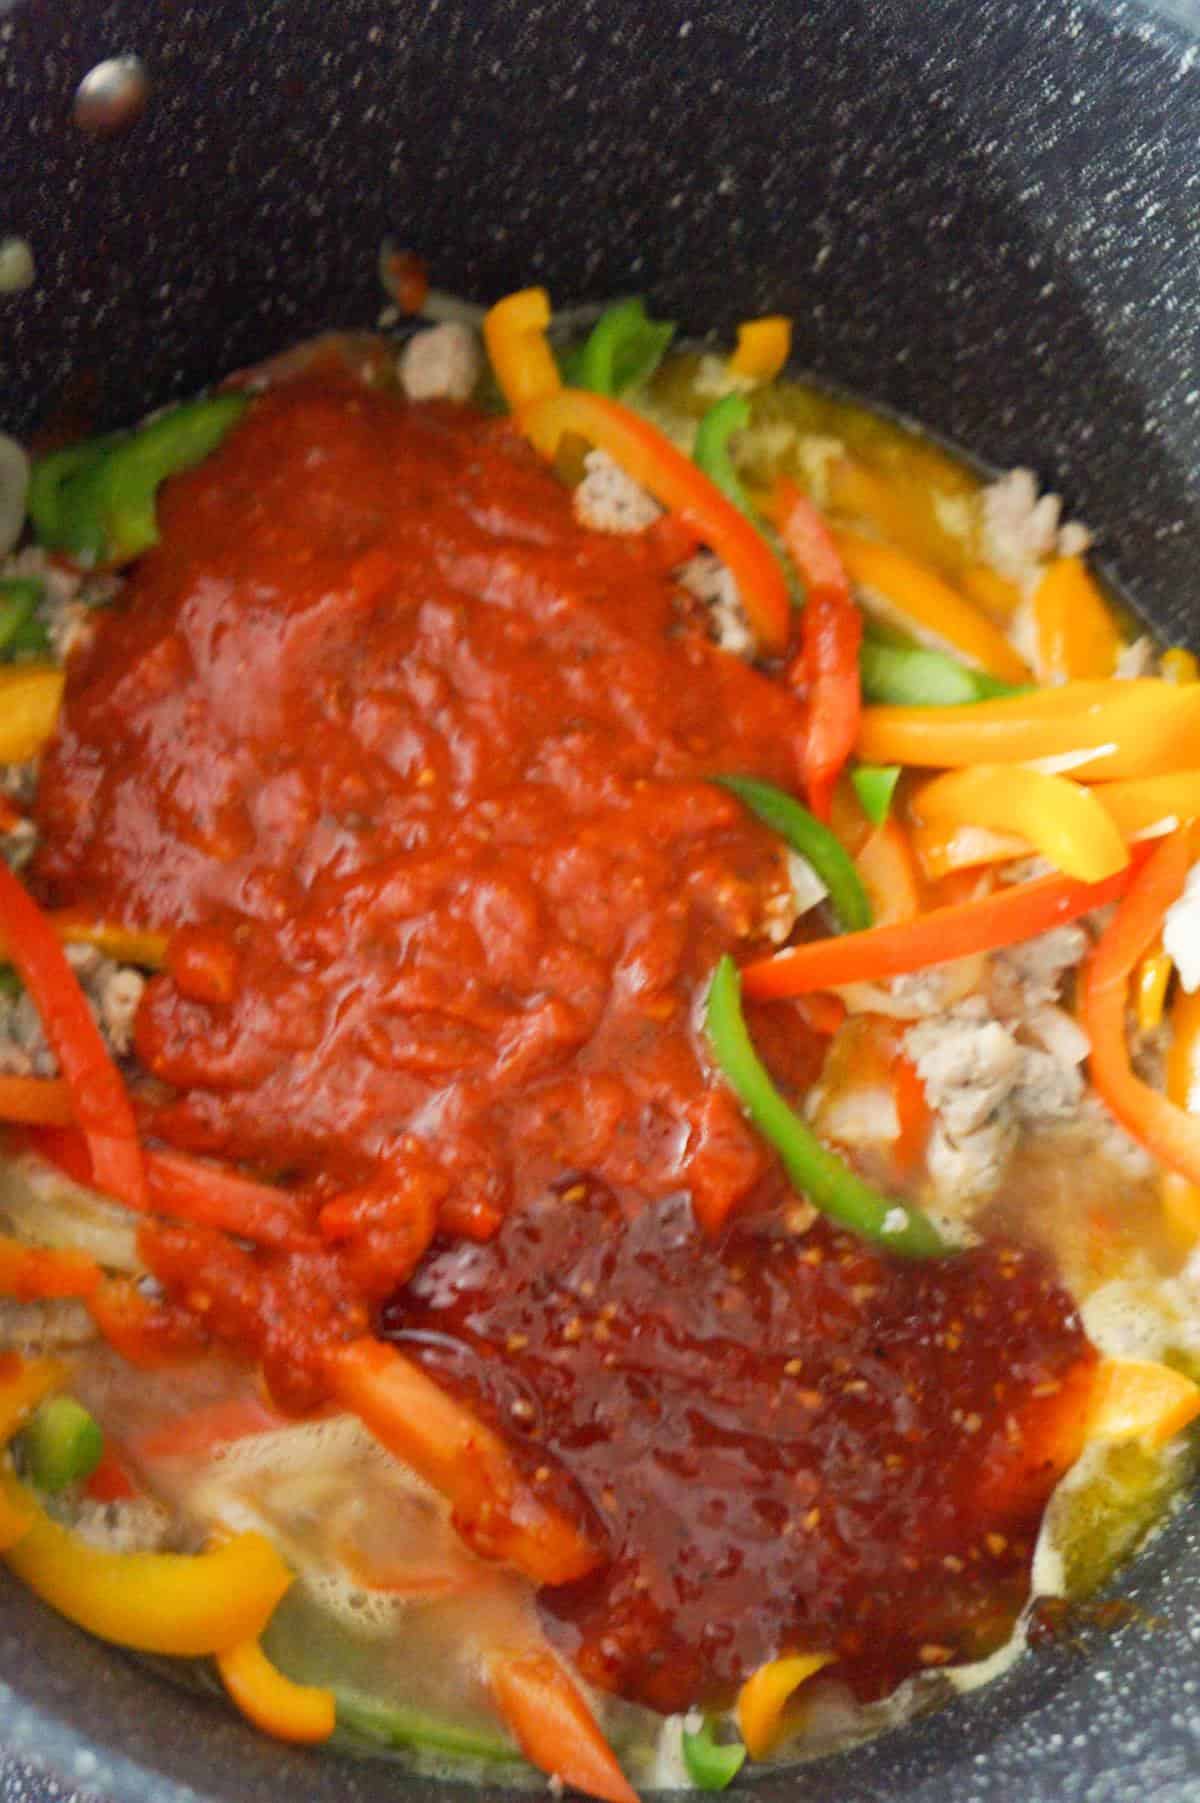 marinara and sweet thai chili sauce on top of sausage and peppers mixture in a large pot